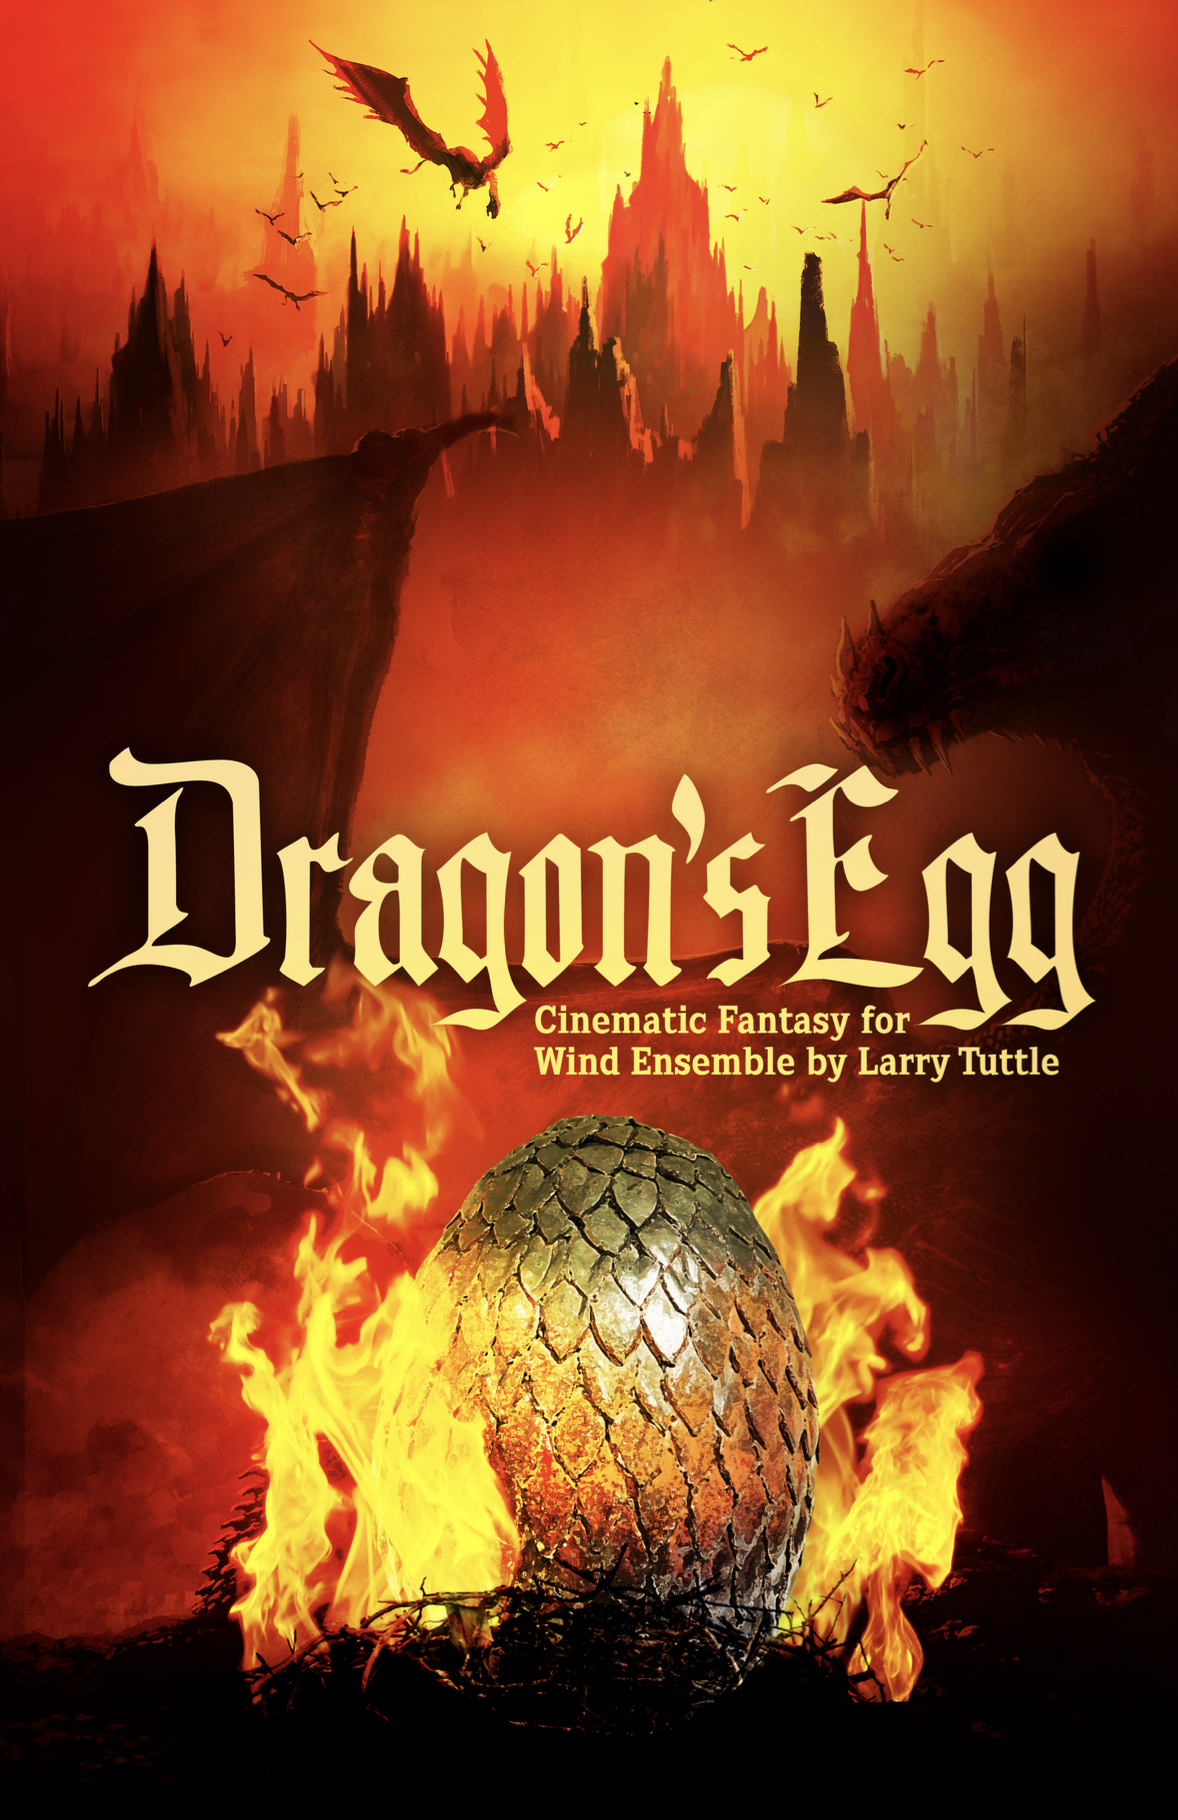 Dragon's Egg (Score Only) by Larry Tuttle